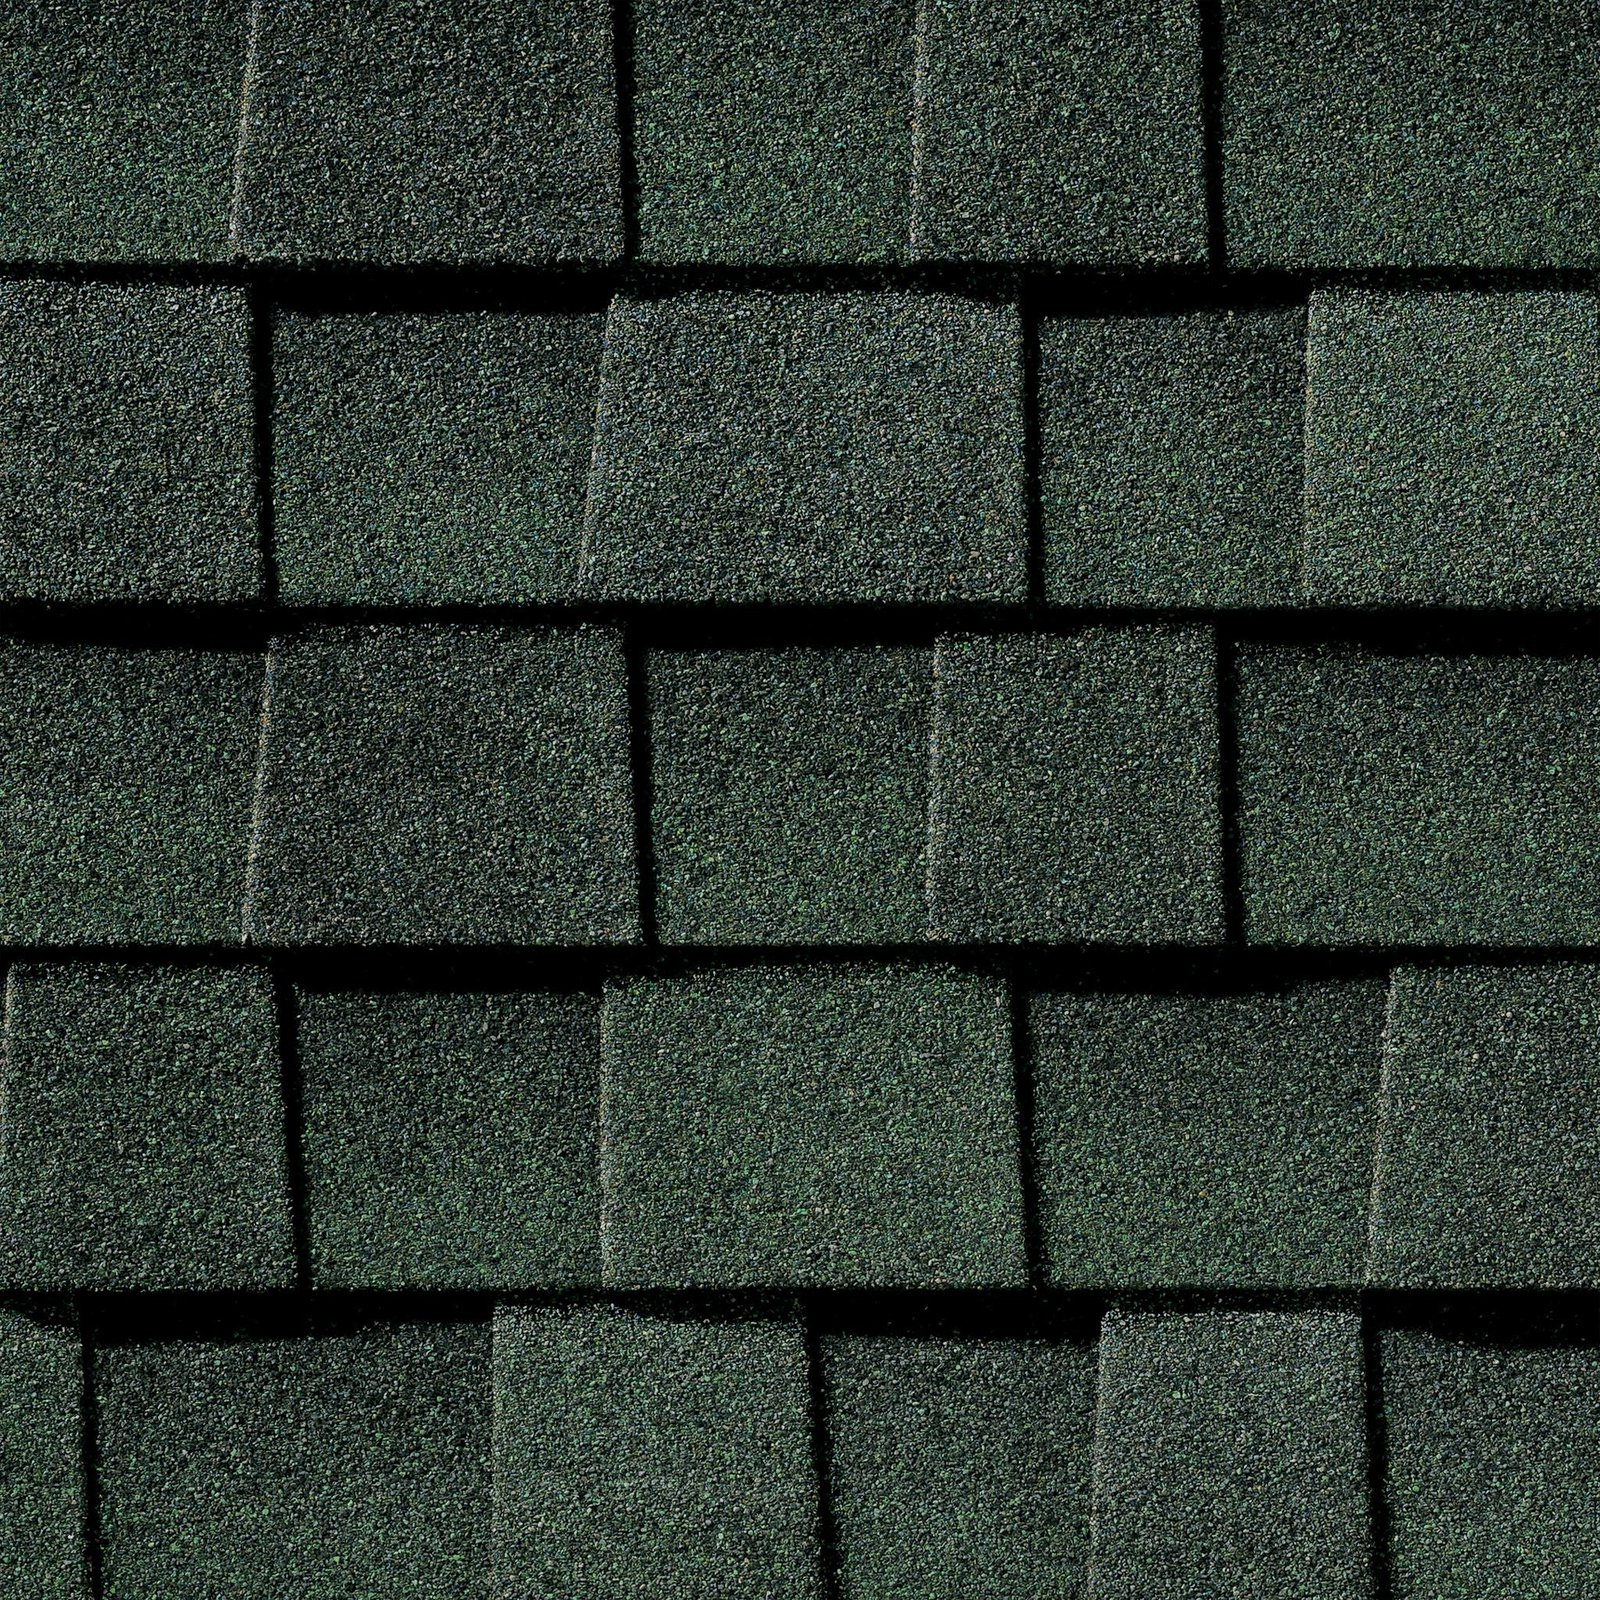 Close up photo of GAF's Timberline Natural Shadow Hunter Green shingle swatch